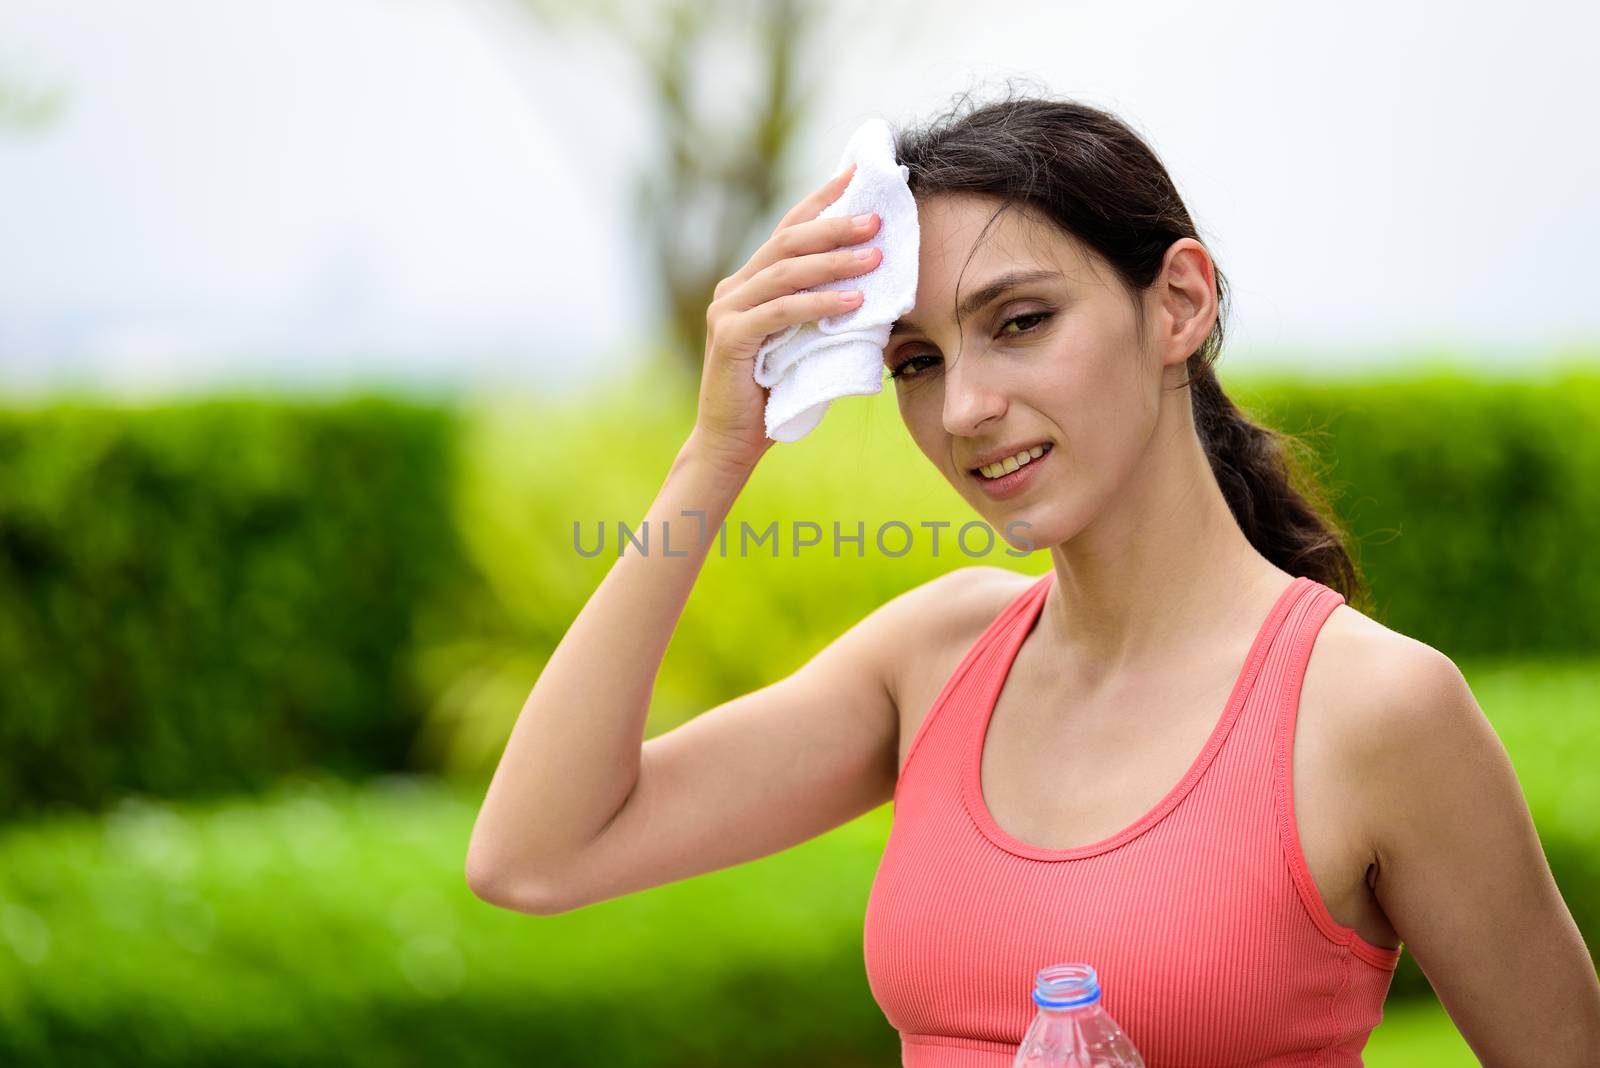 Beautiful woman runner has tired and rest for drinking water and a white towel to wipe her face after running in the garden.